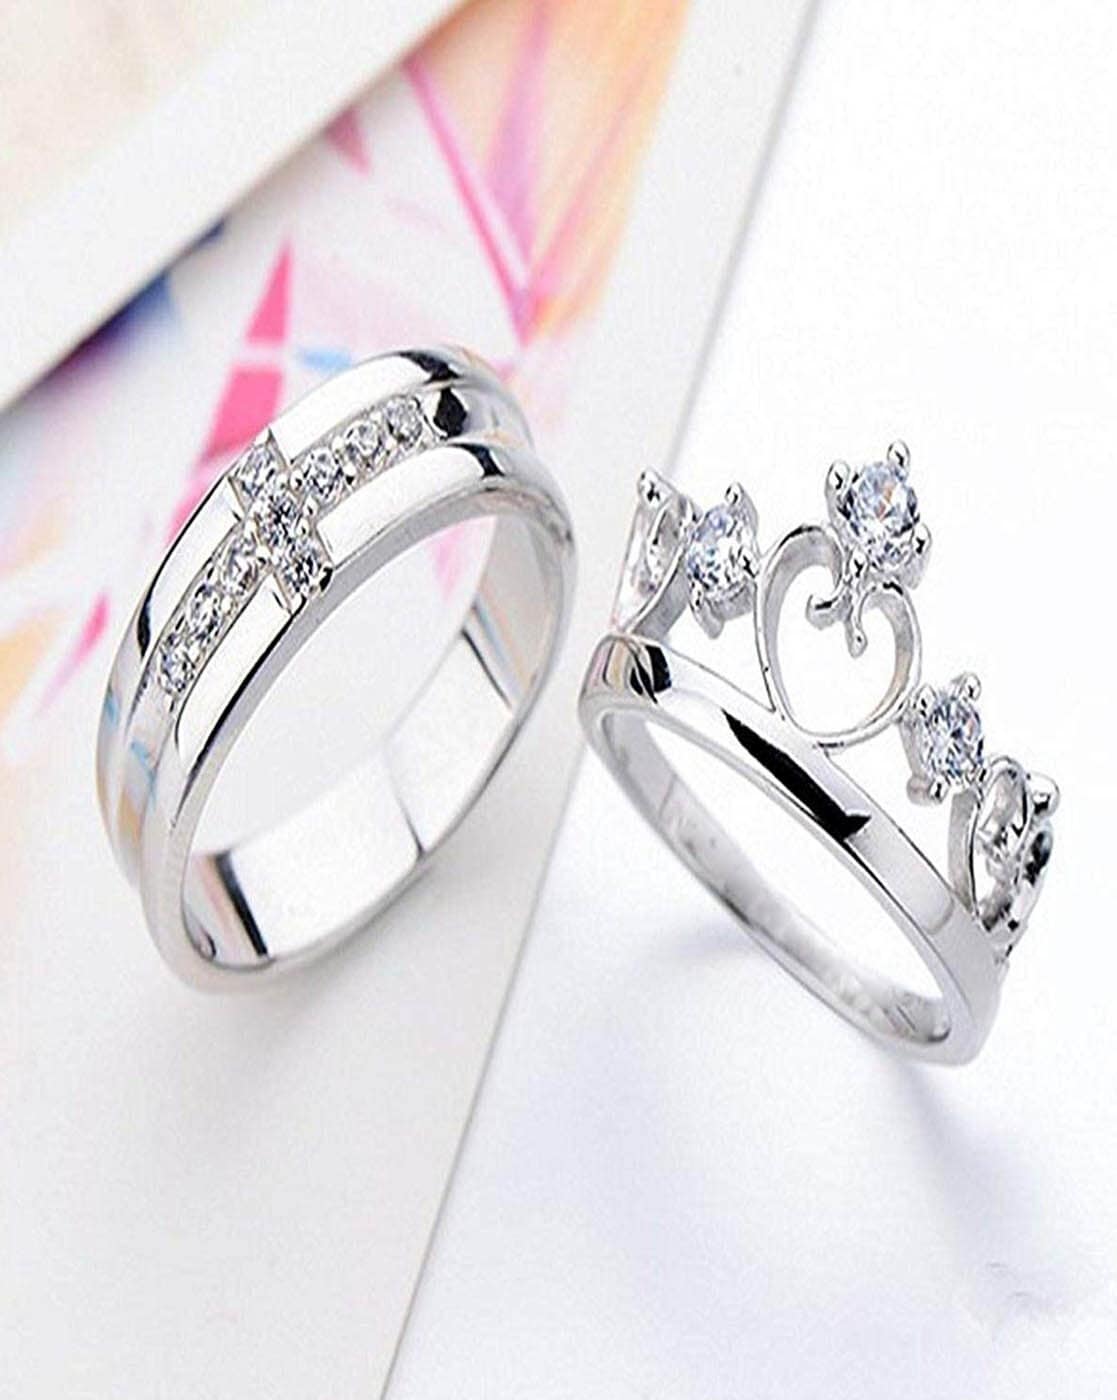 2 Pcs/Set Romantic Hand In Hand Forever Couple Ring Fashion King Queen  Stainless Steel Rings For Women Men Gifts For Lovers - AliExpress